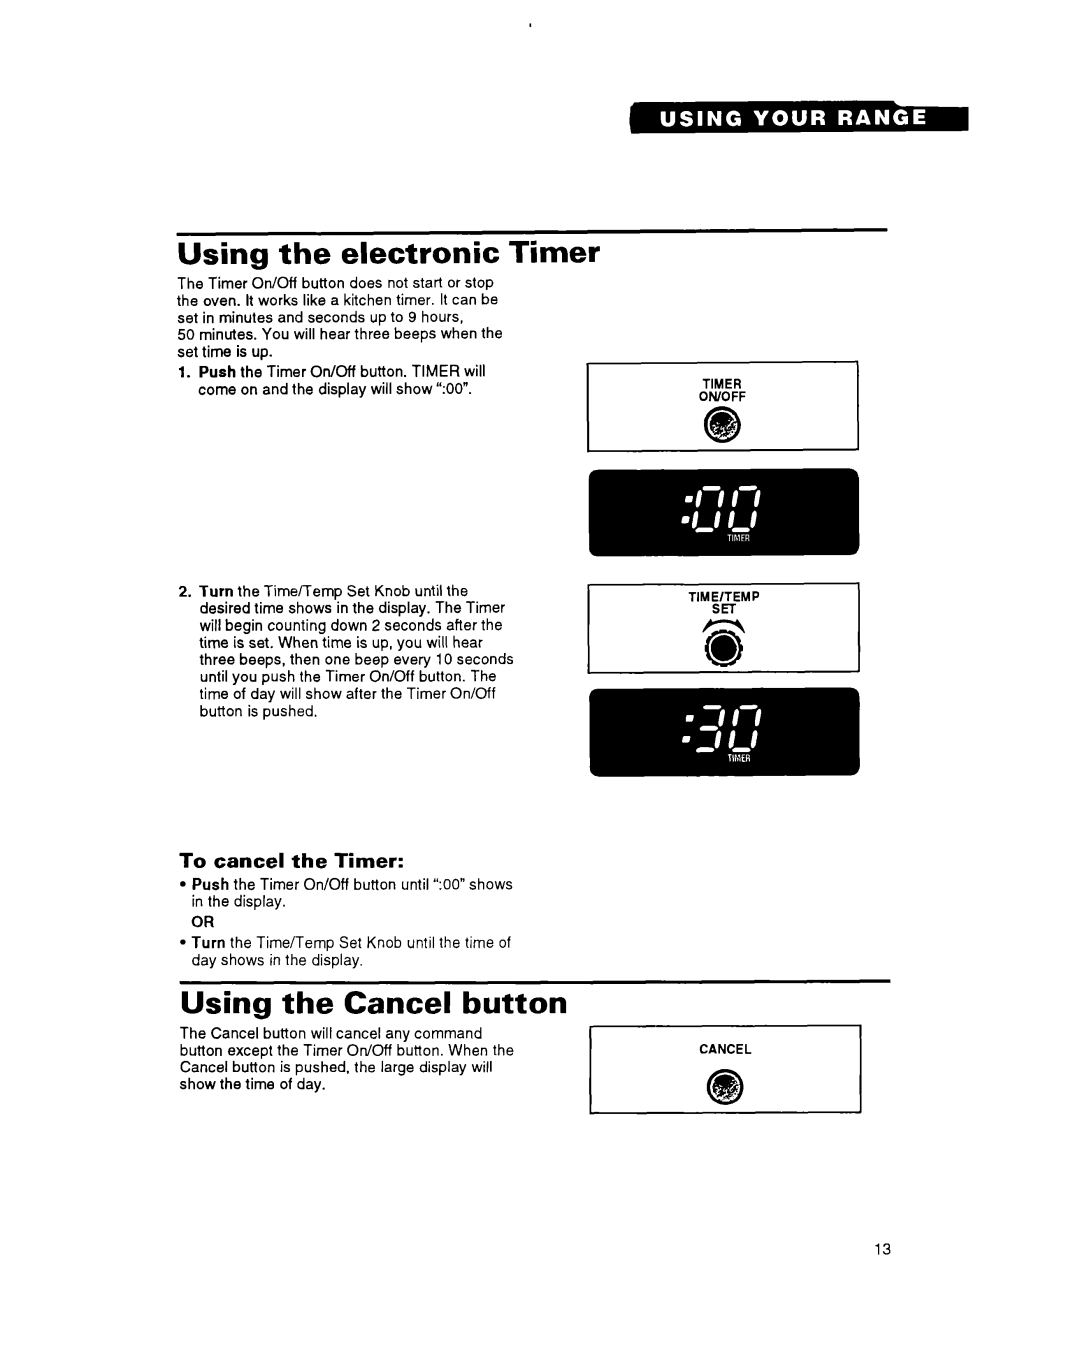 Whirlpool FGS395Y important safety instructions Using the electronic Timer, Using the Cancel button, To cancel the Timer 